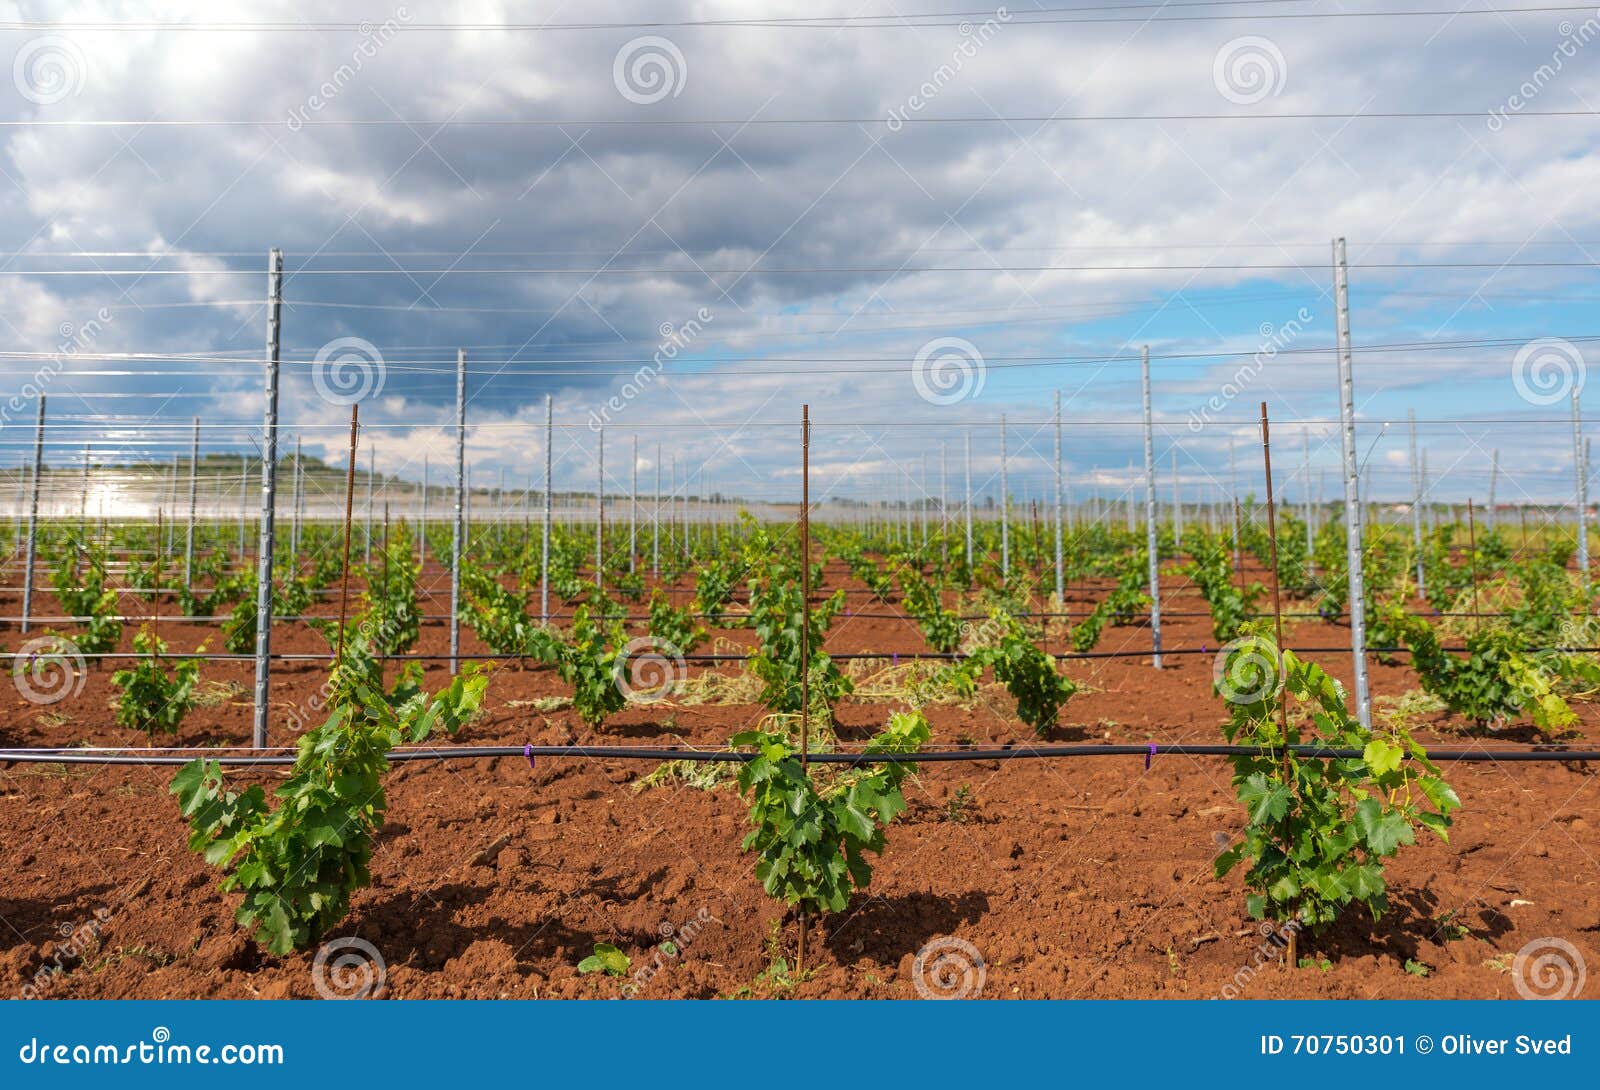 viticulture with grape saplings